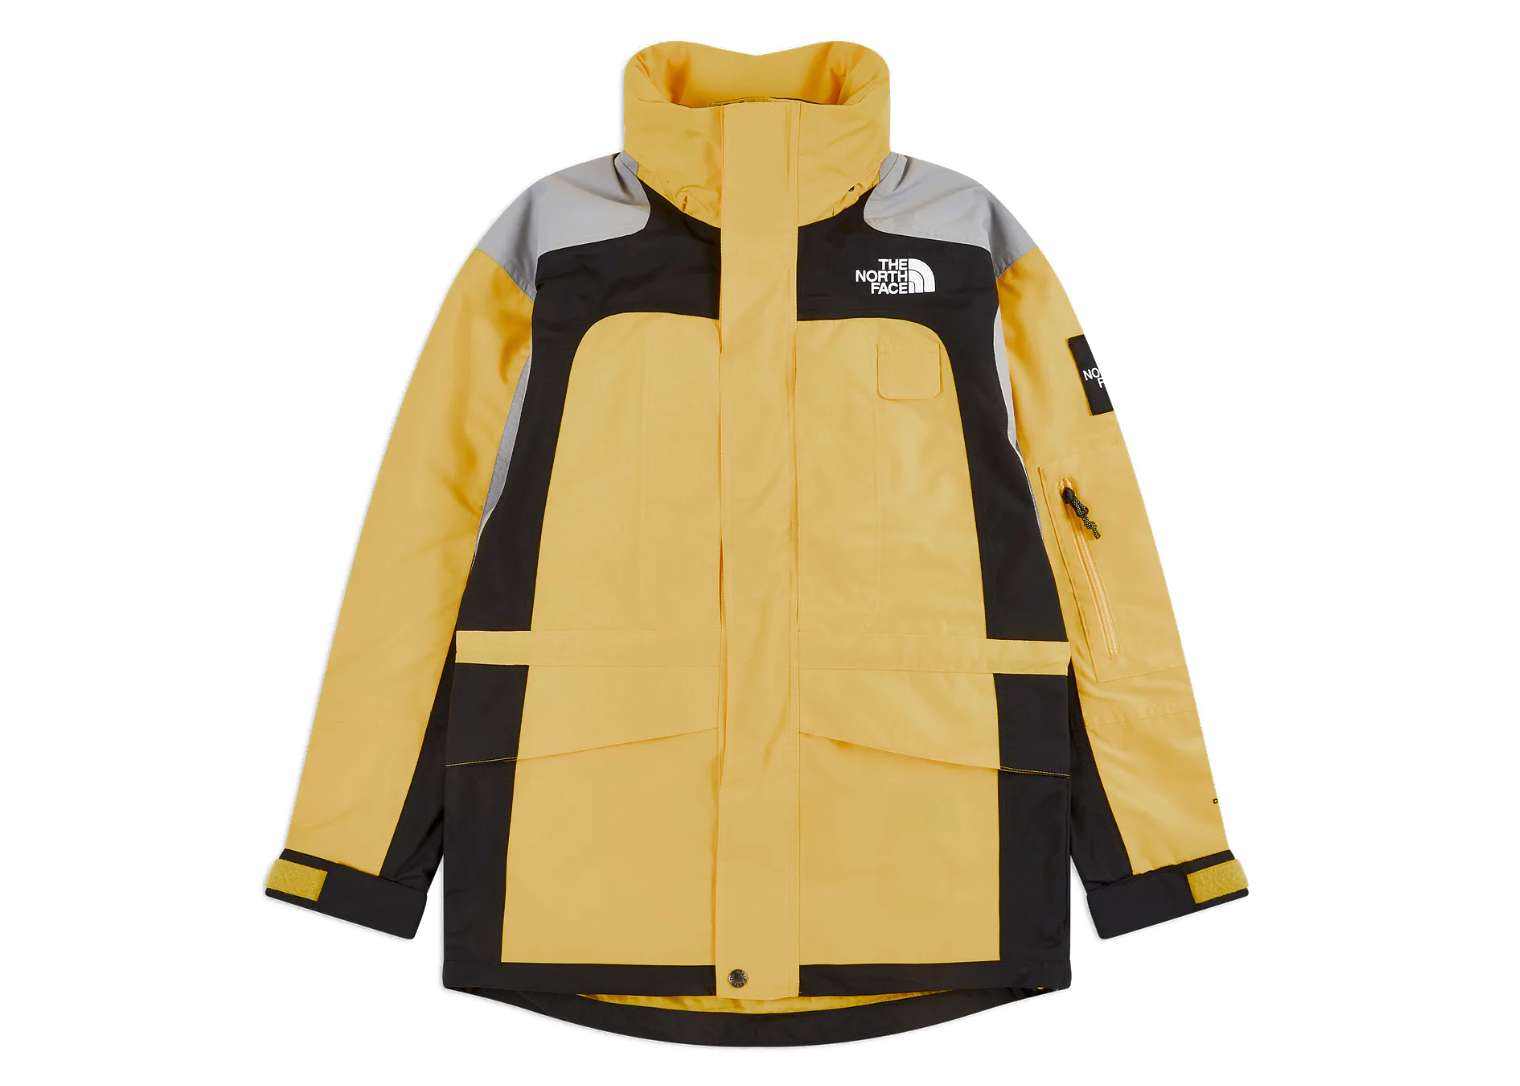 NEW ARRIVALthe north face search & rescue ジャケット・アウター